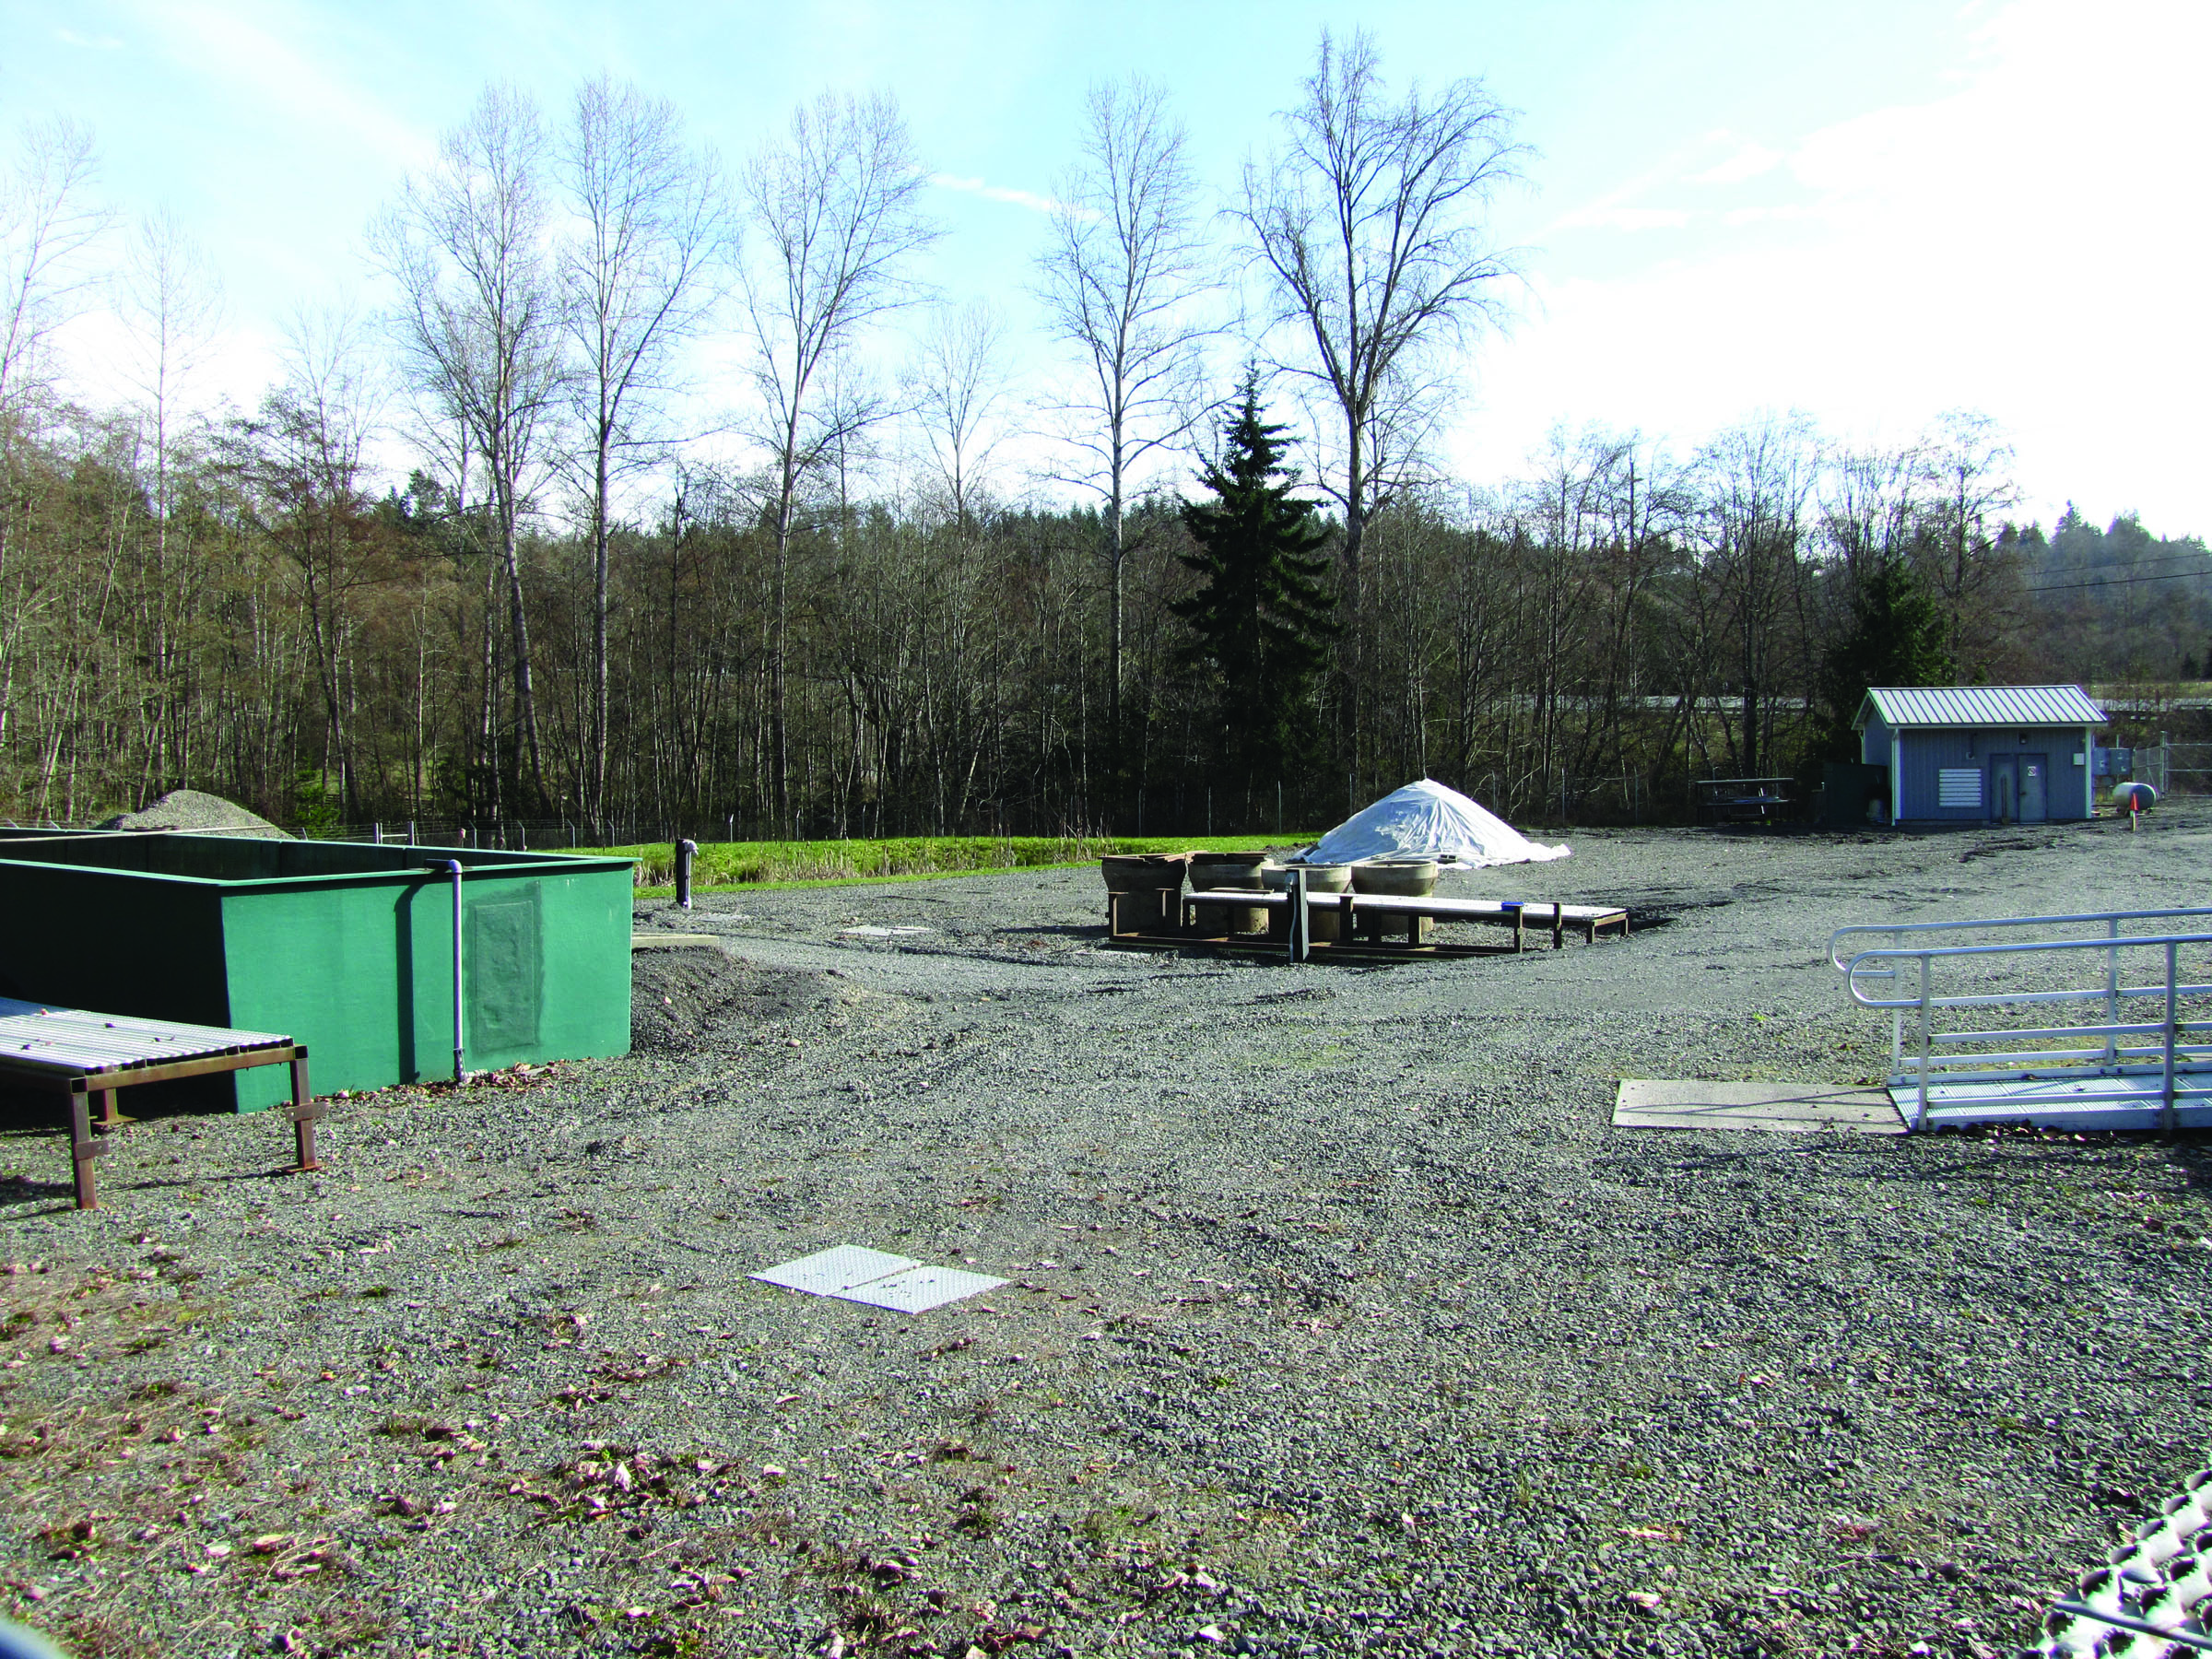 A mobile office and some equipment remain at the state Fish and Wildlife fish-rearing facility at Morse Creek. The primary fish rearing ponds have been removed. (Arwyn Rice/Peninsula Daily News)